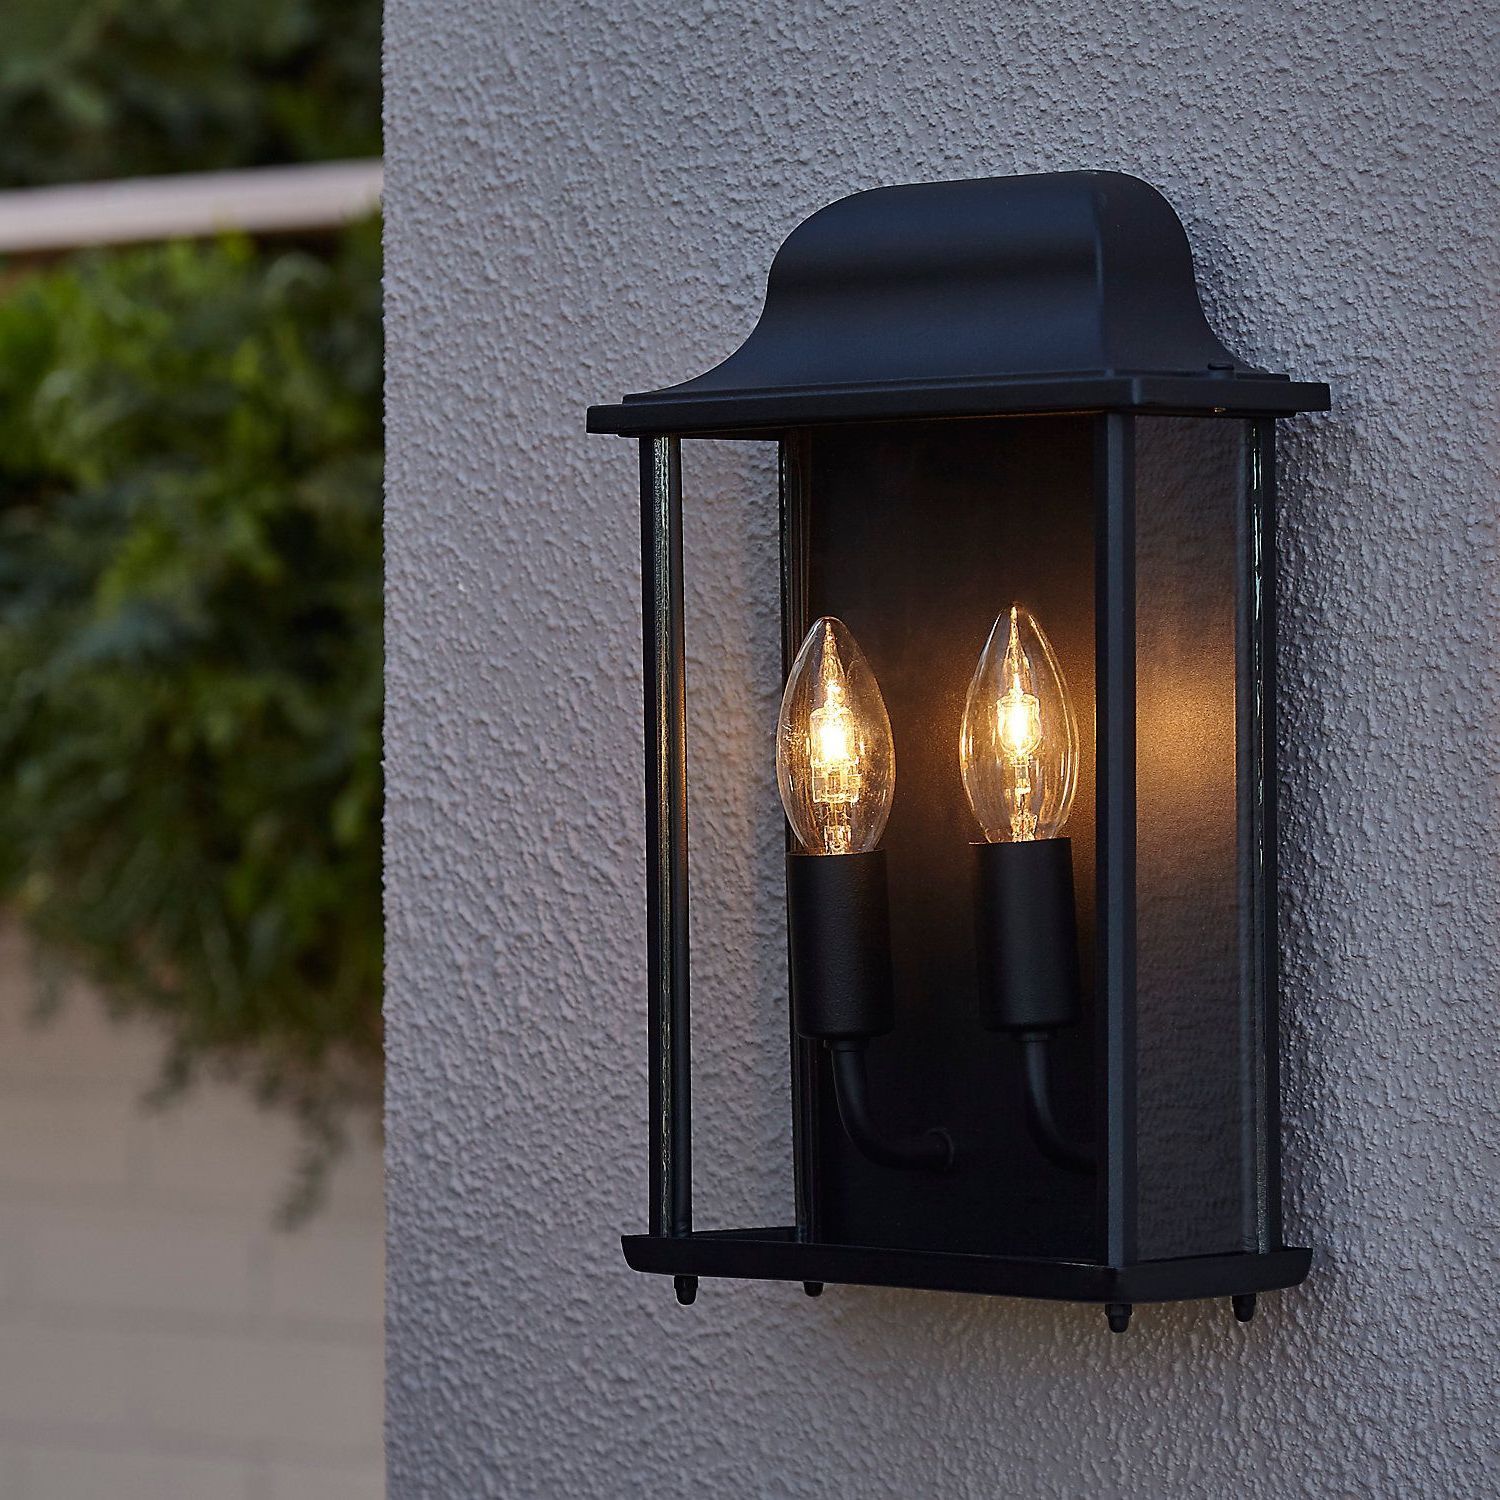 High Black Powder Coated Led Outdoor Light (View 4 of 4)